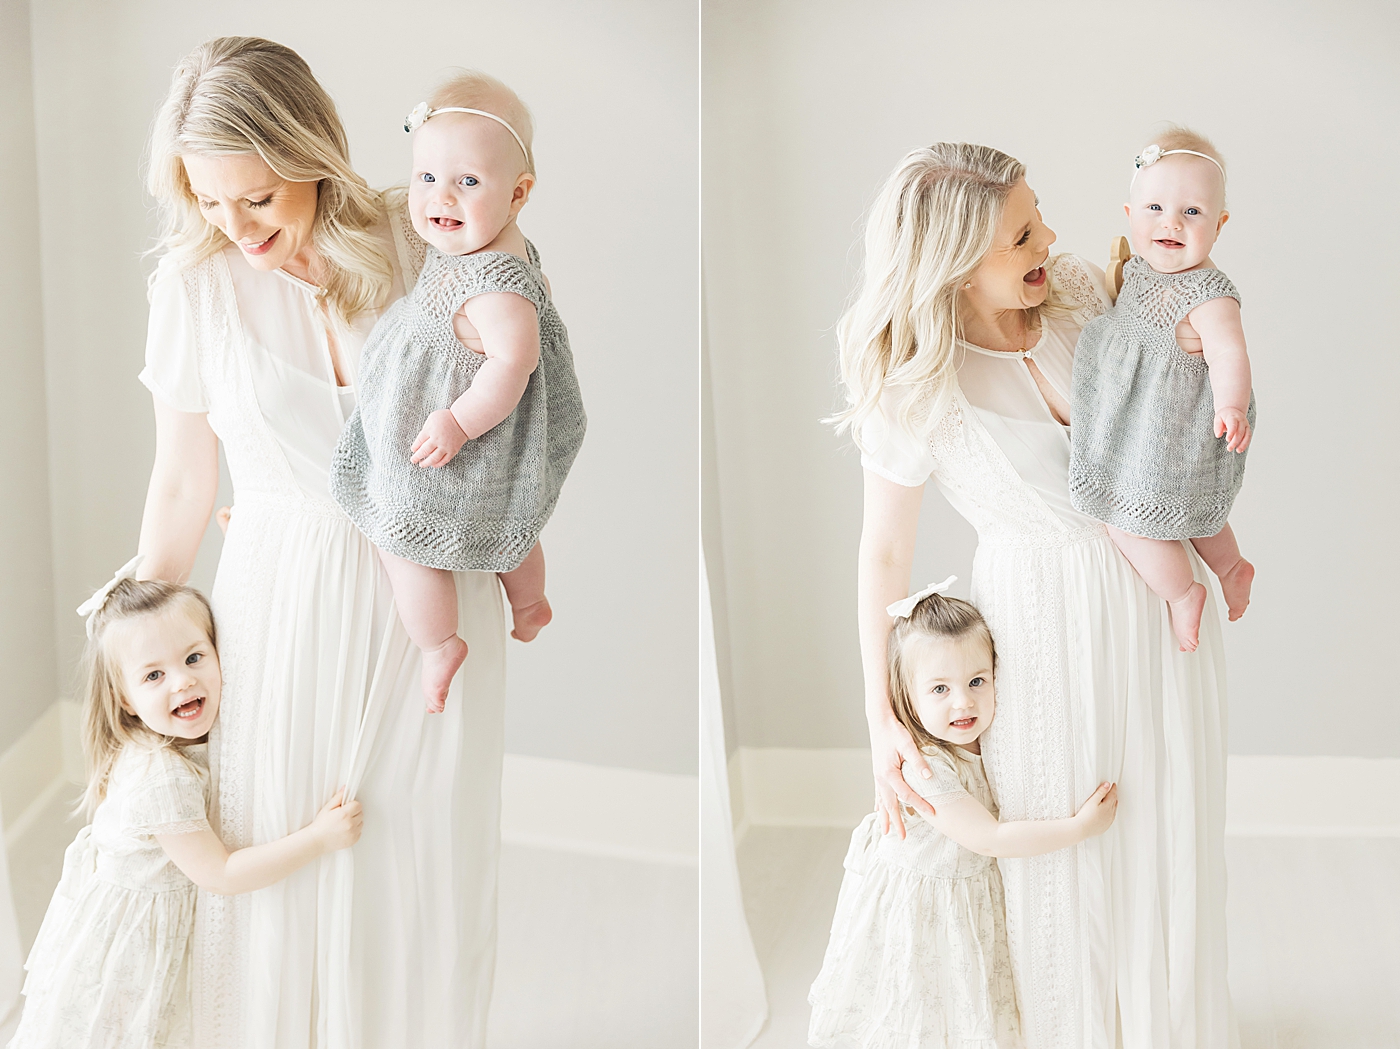 Mom with her two girls. Photos by Fresh Light Photography.